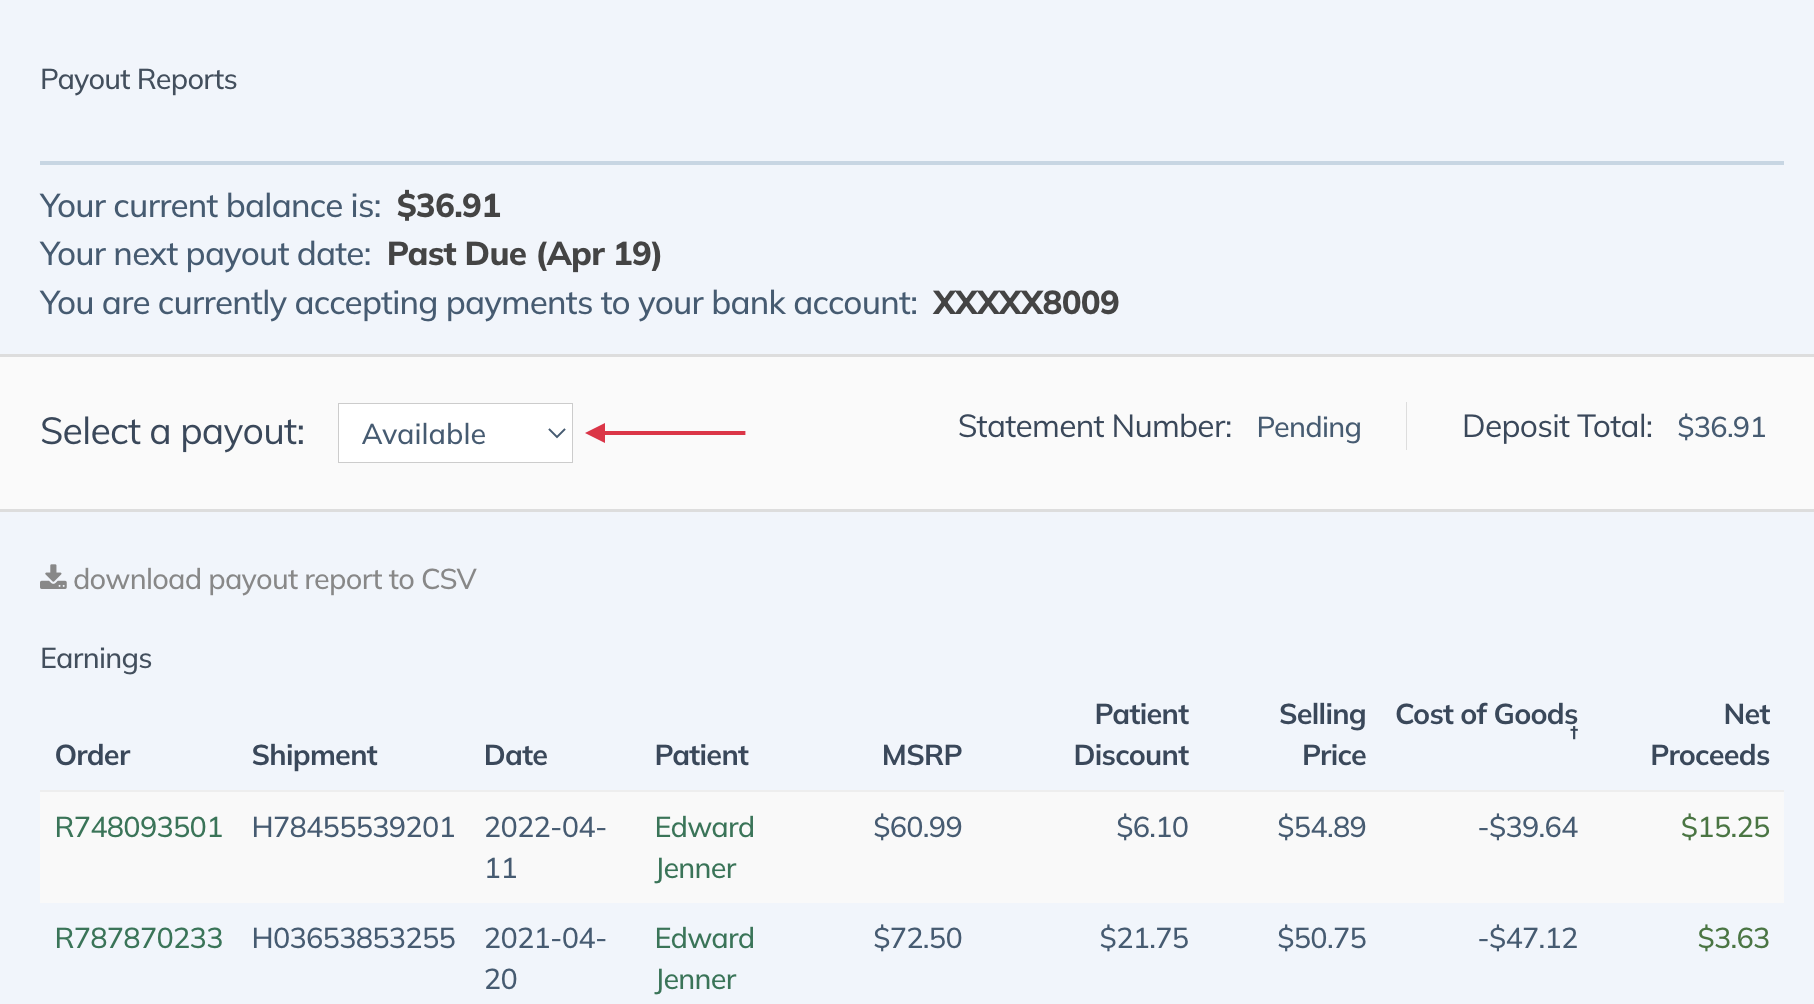 a payout displaying available earnings to be paid out on the next payout date